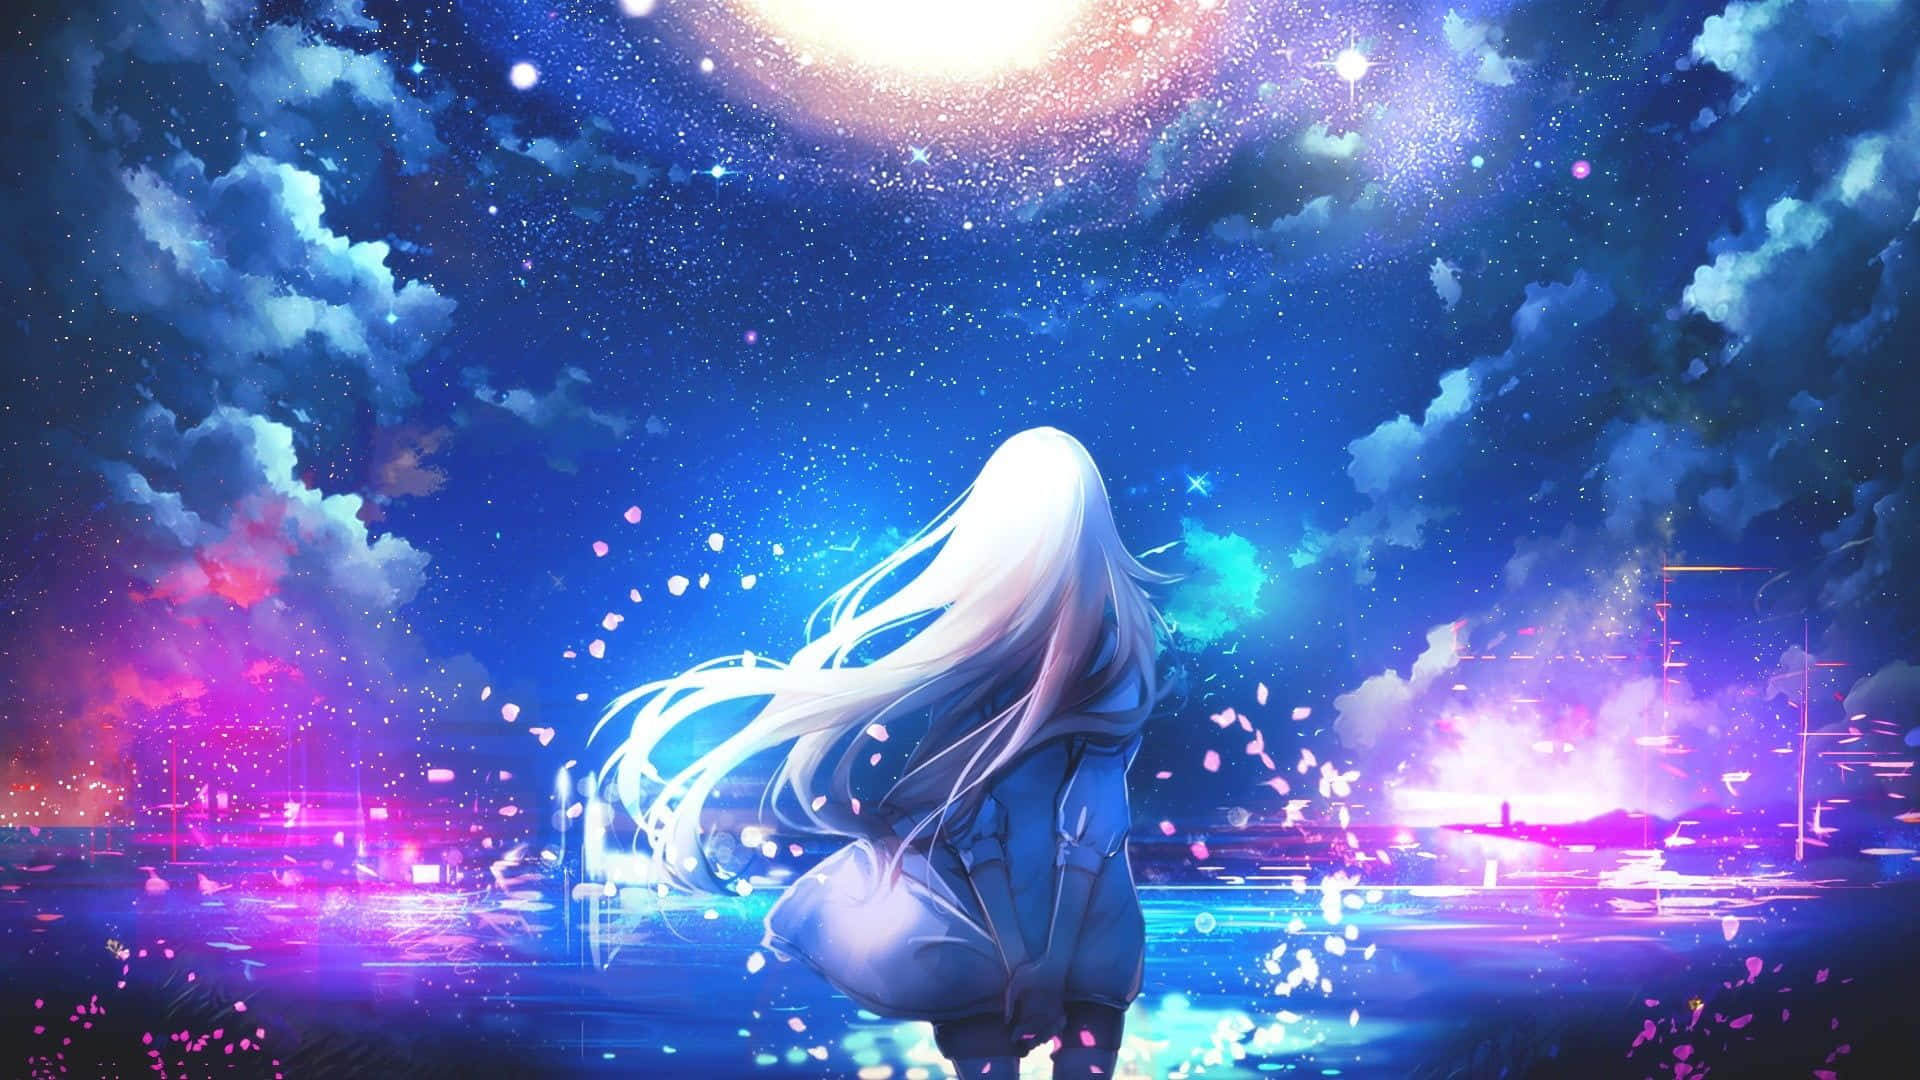 A Girl With Long Hair Standing In The Water With A Starry Sky Wallpaper